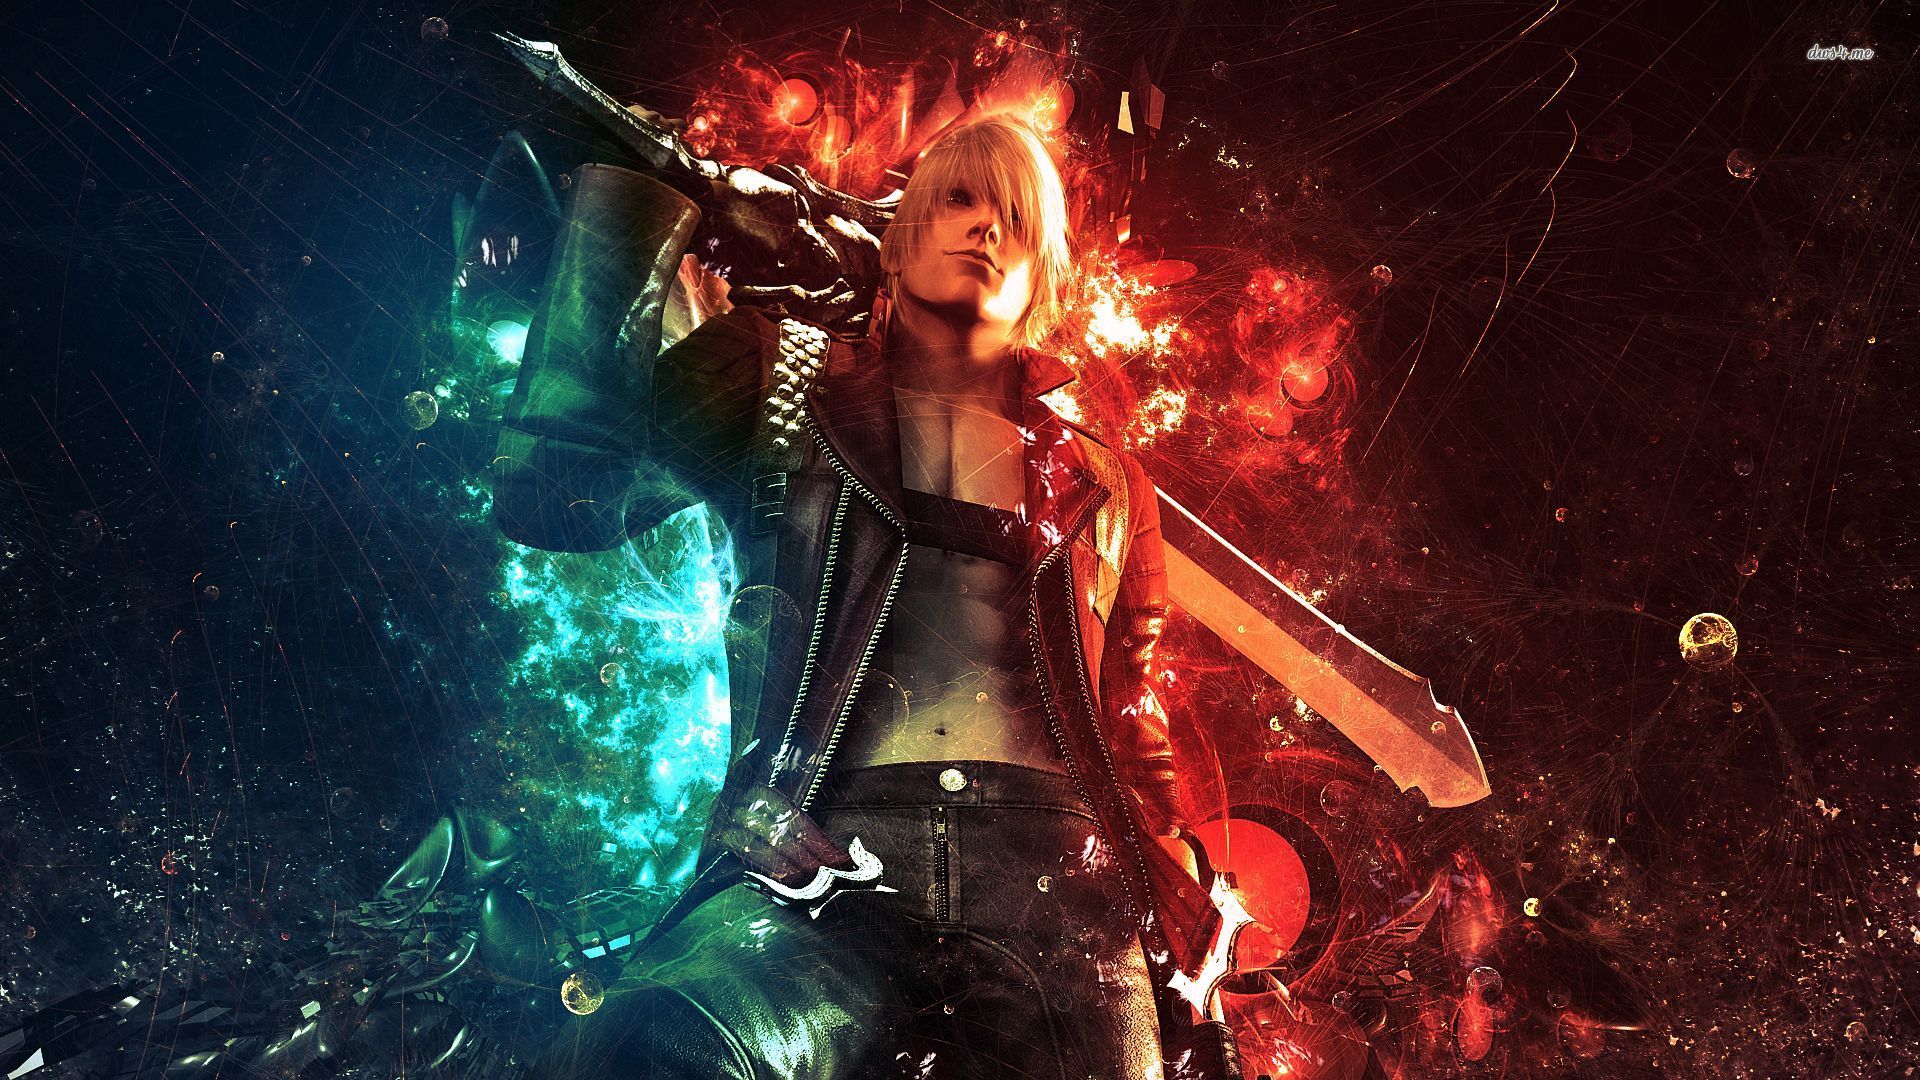 Devil May Cry wallpaper 1920x1080 67394